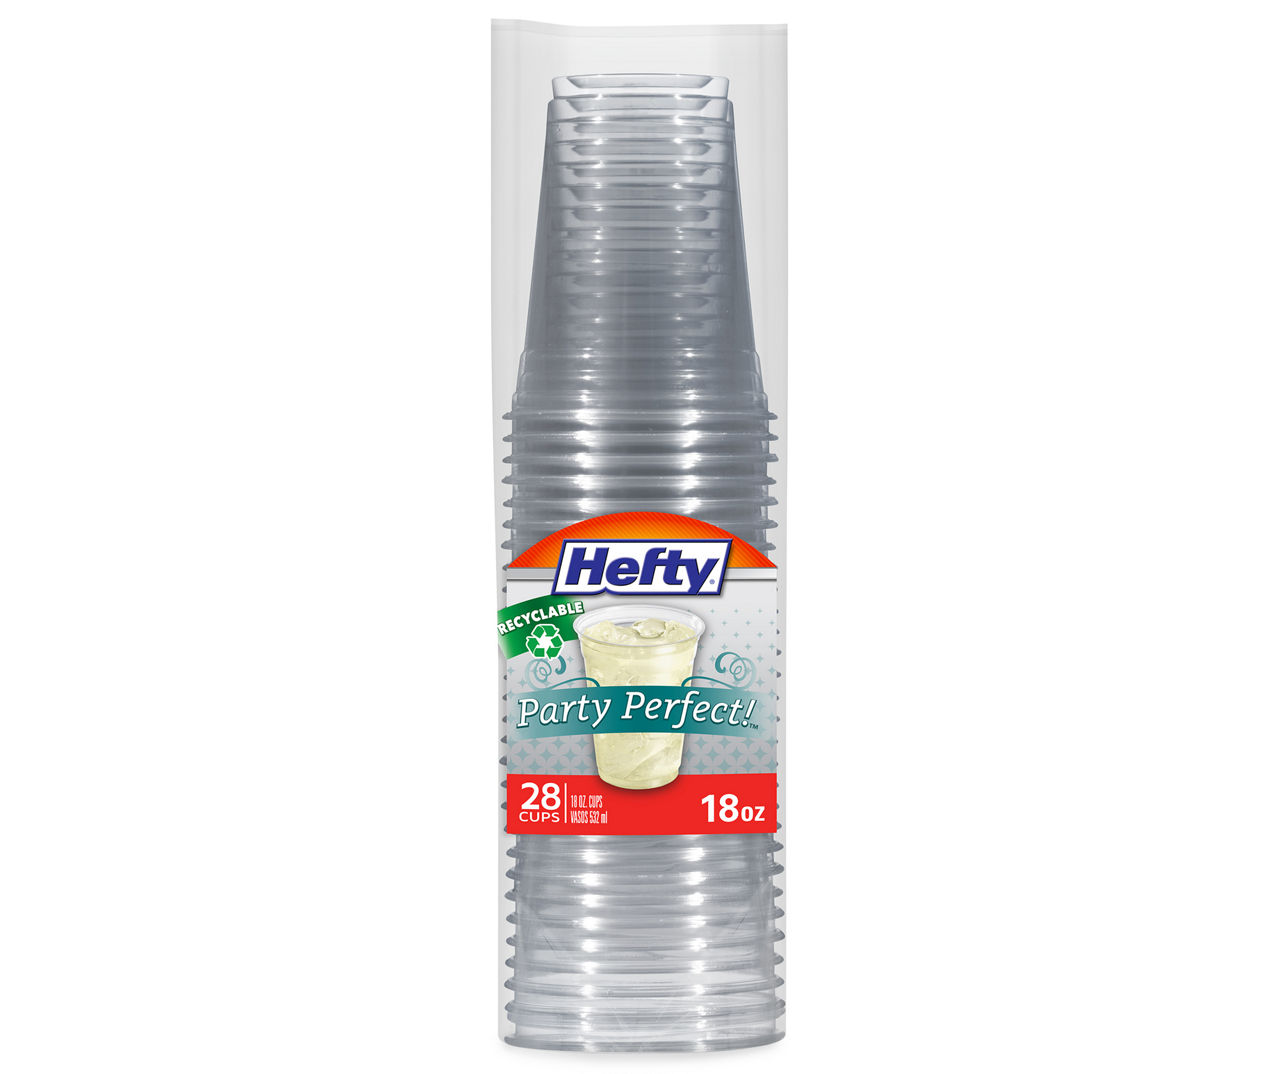 Hefty Hefty Party Perfect! 18 oz. Cups 28 ct Pack